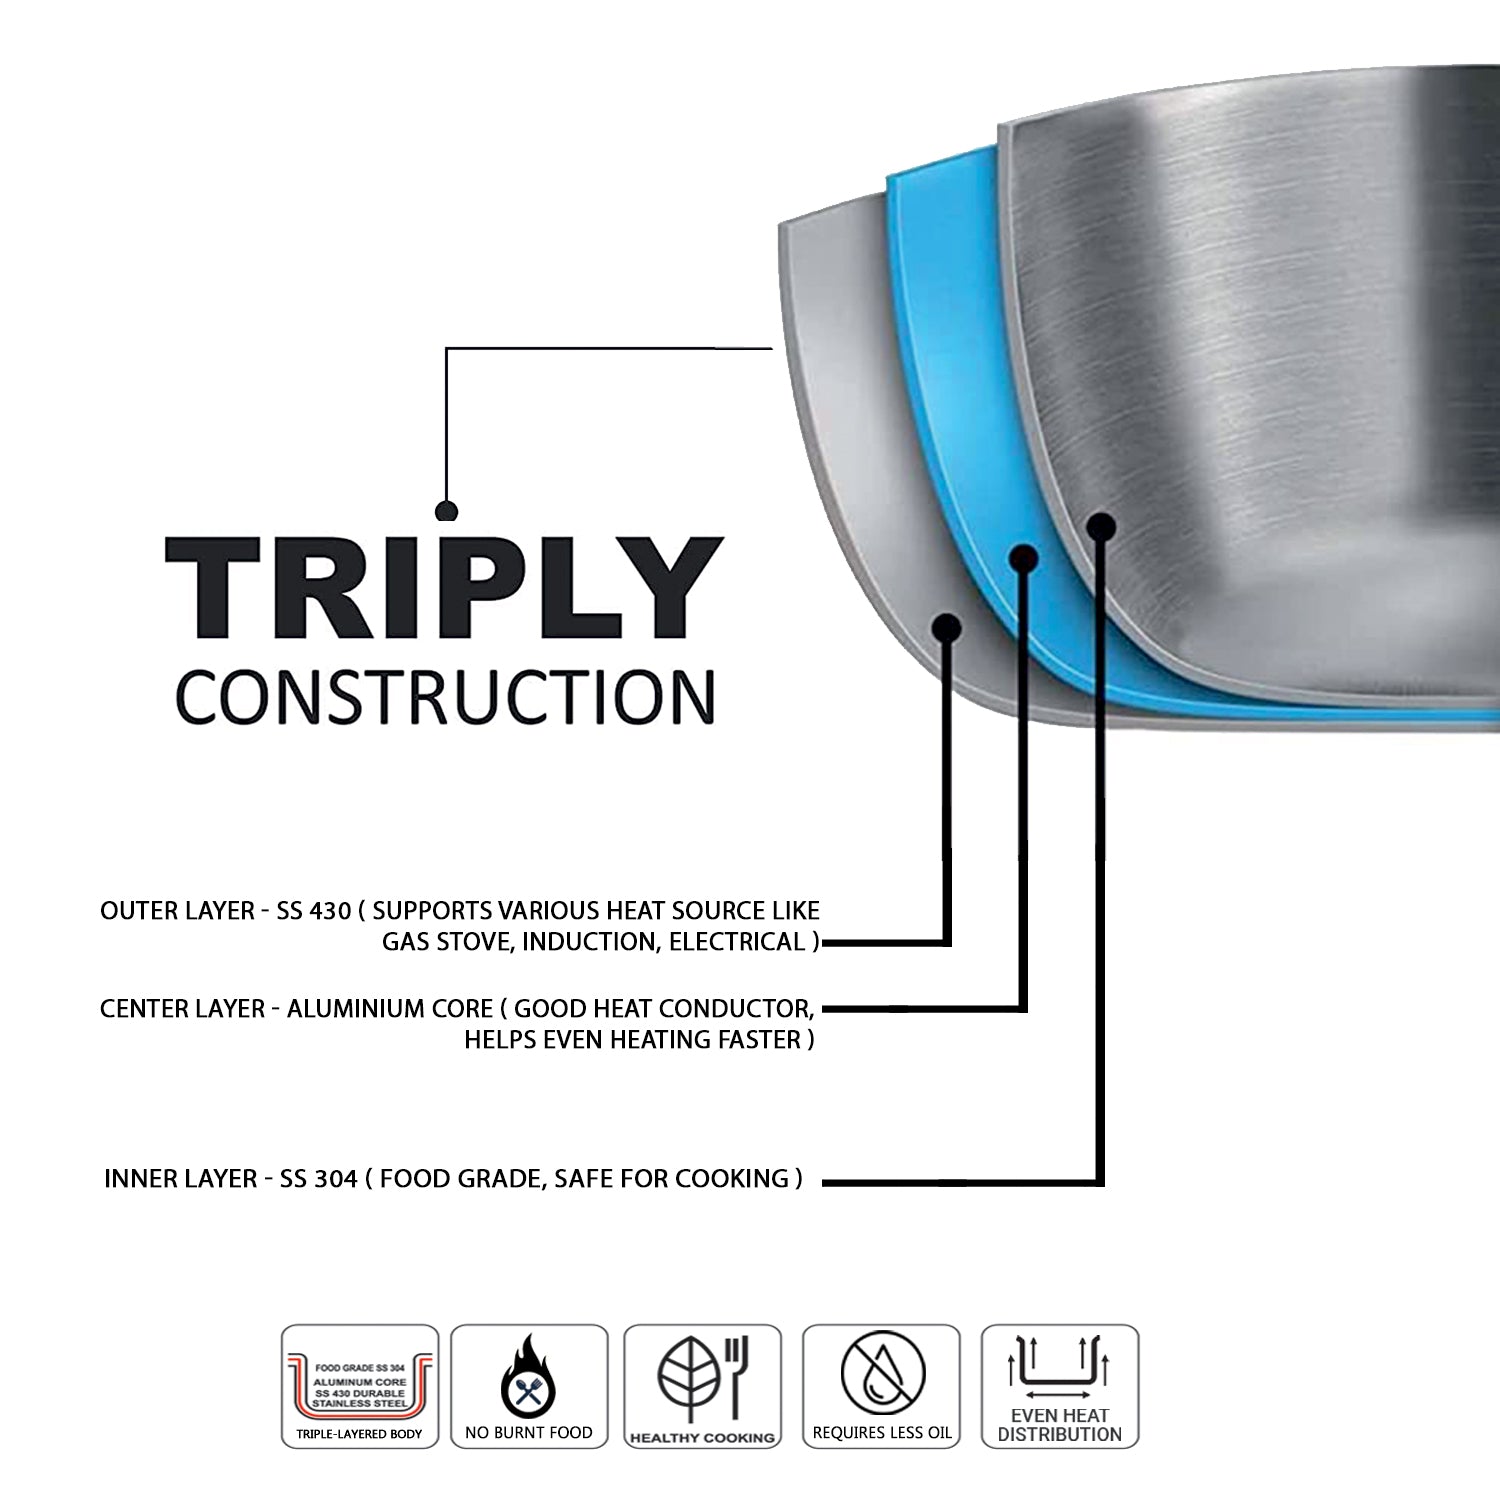 AVIAS Riara premium stainless steel Triply Tope with steel lid tripple layer construction